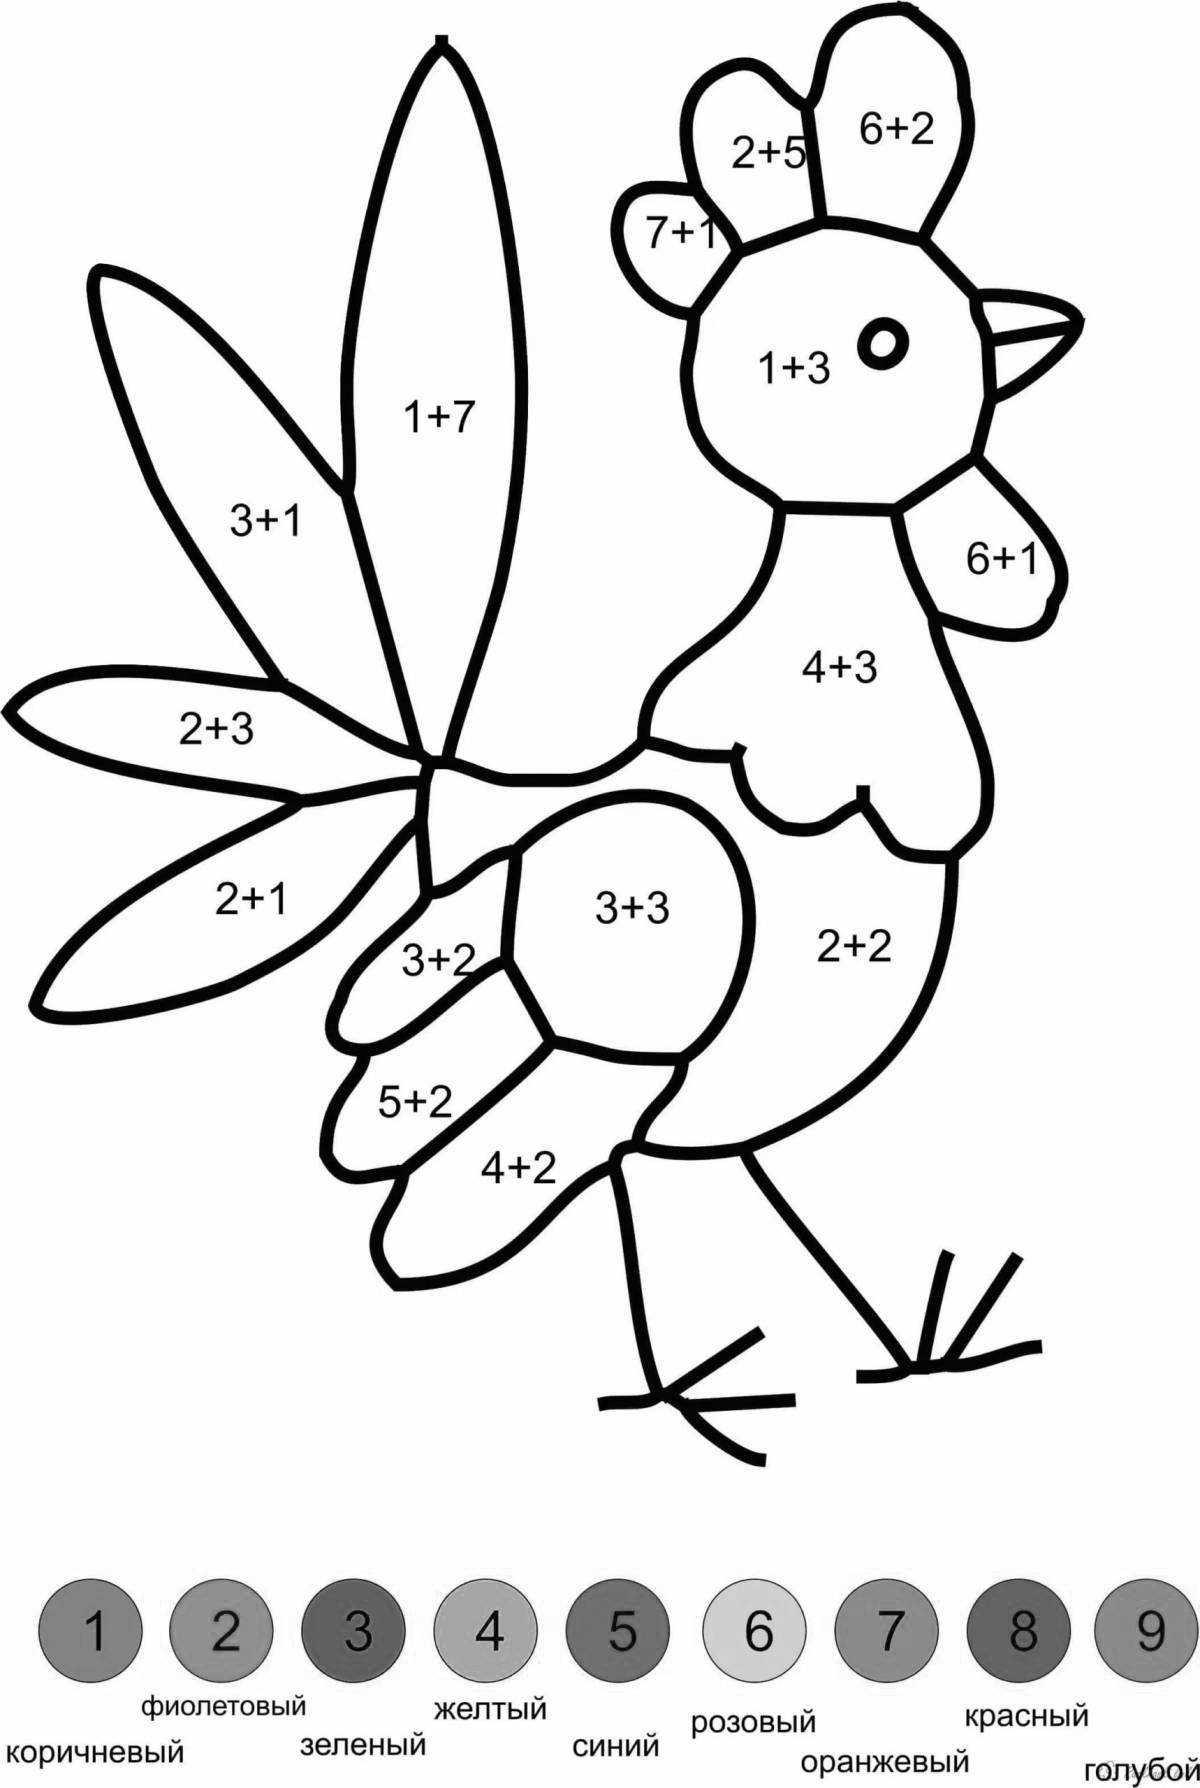 Examples of creative coloring pages